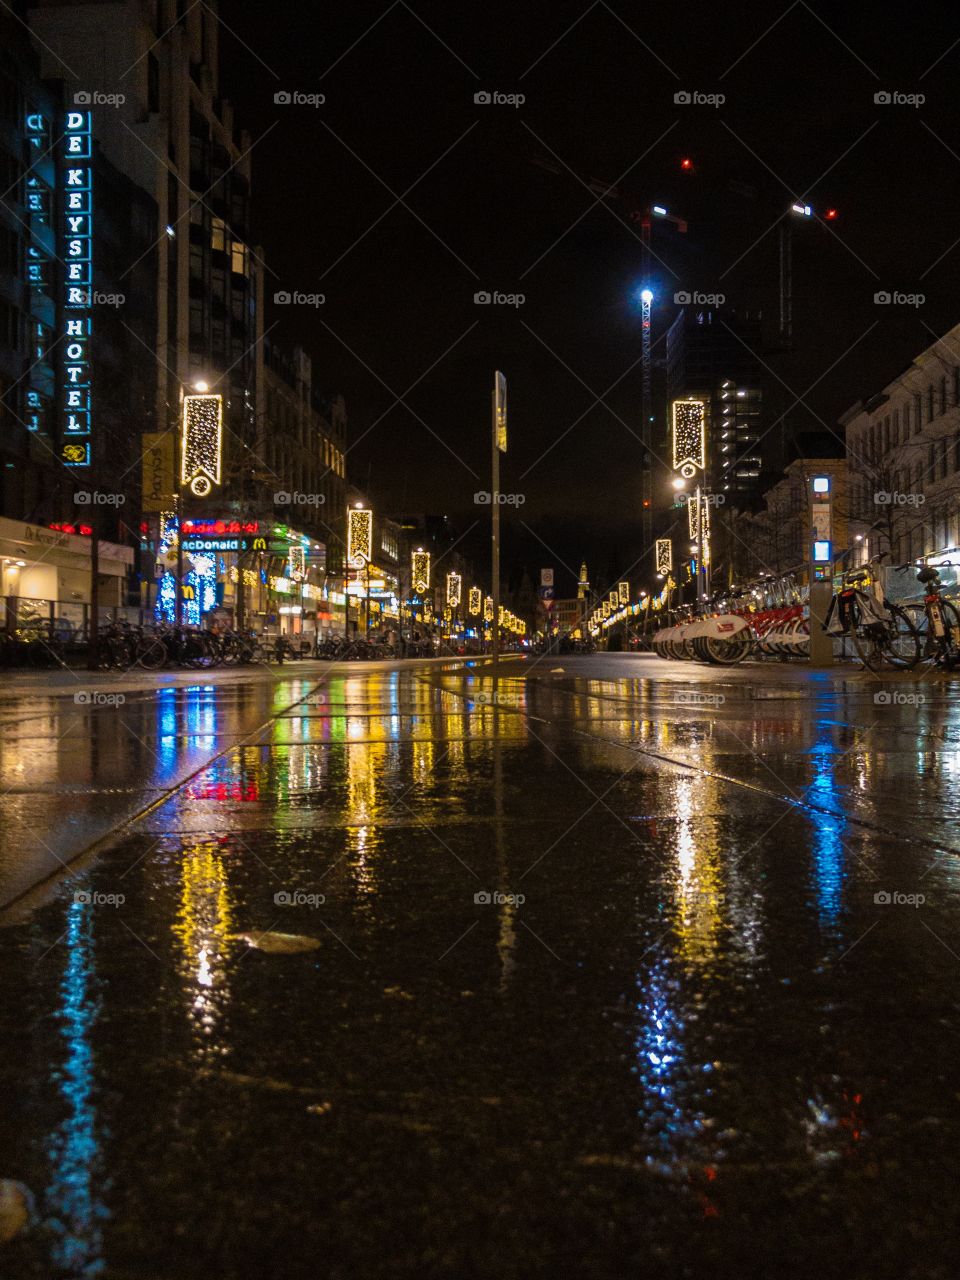 shopping street in the city with colorful neon lights at night reflected on the wet street 